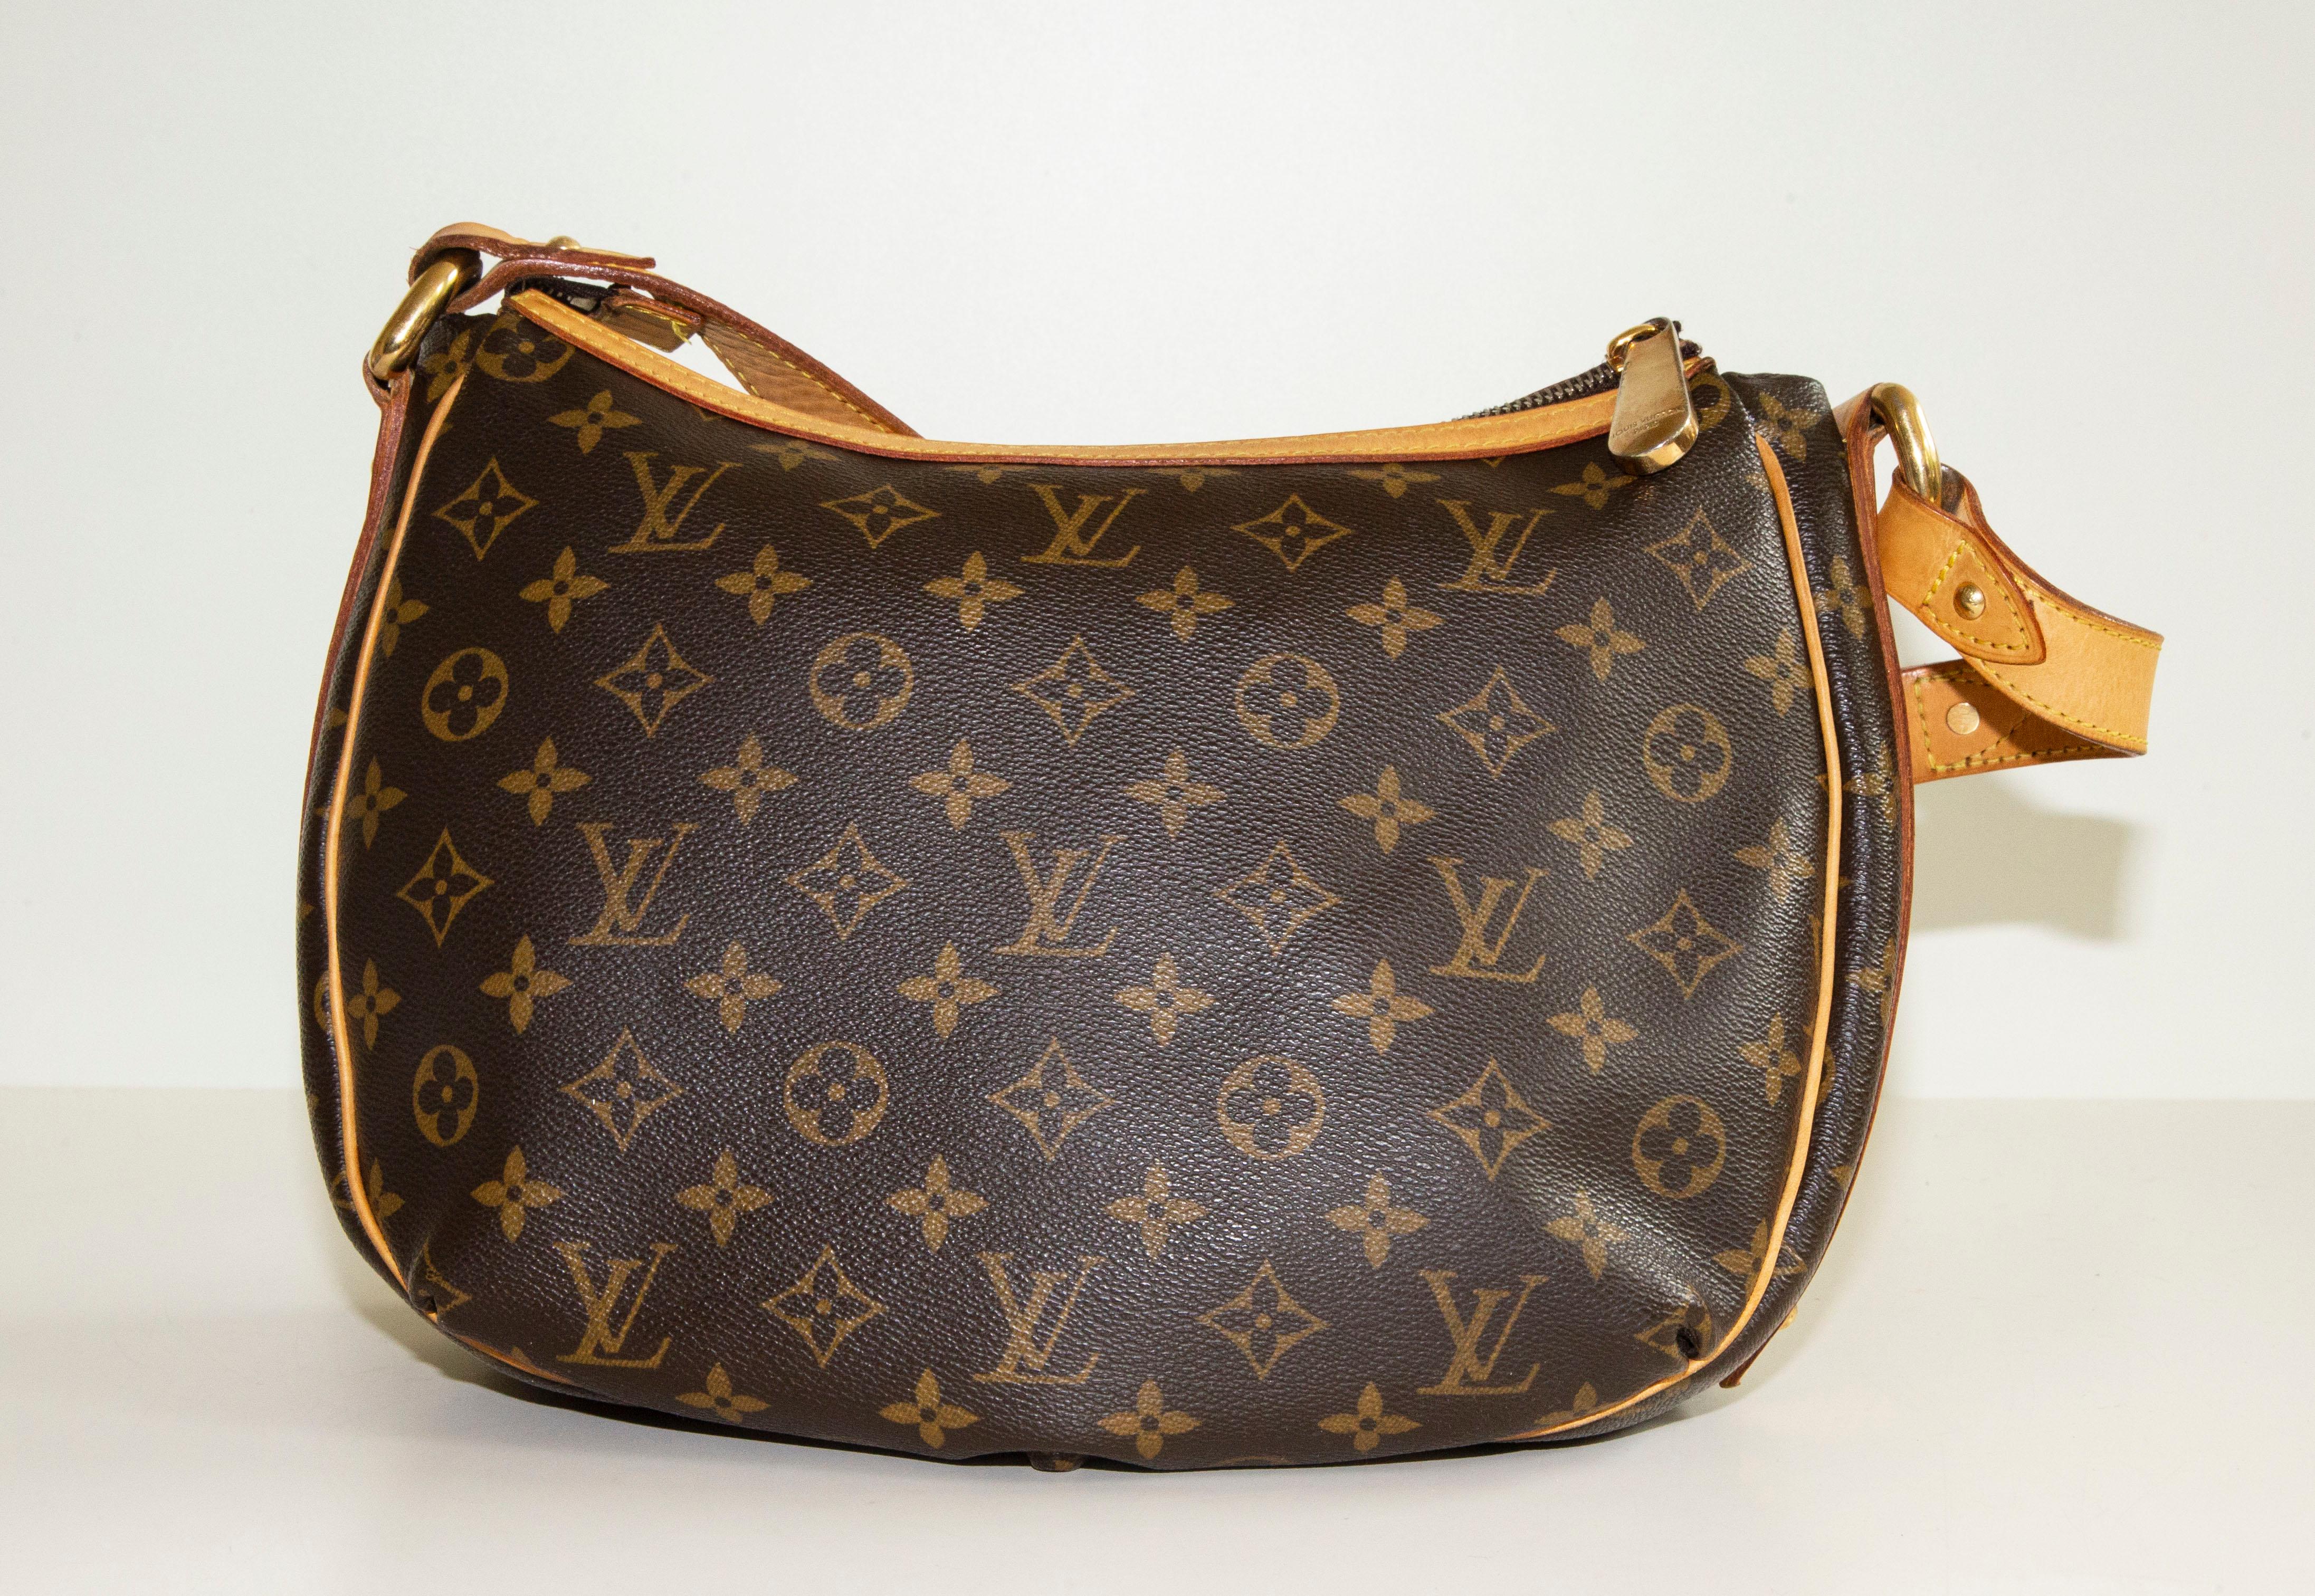 An authentic Louis Vuitton Tulum PM. The bag features an LV monogram coated canvas, light brown leather trim, and gold-toned hardware. The interior consists of the front pocket under the flap and the main compartment. The interior is lined with